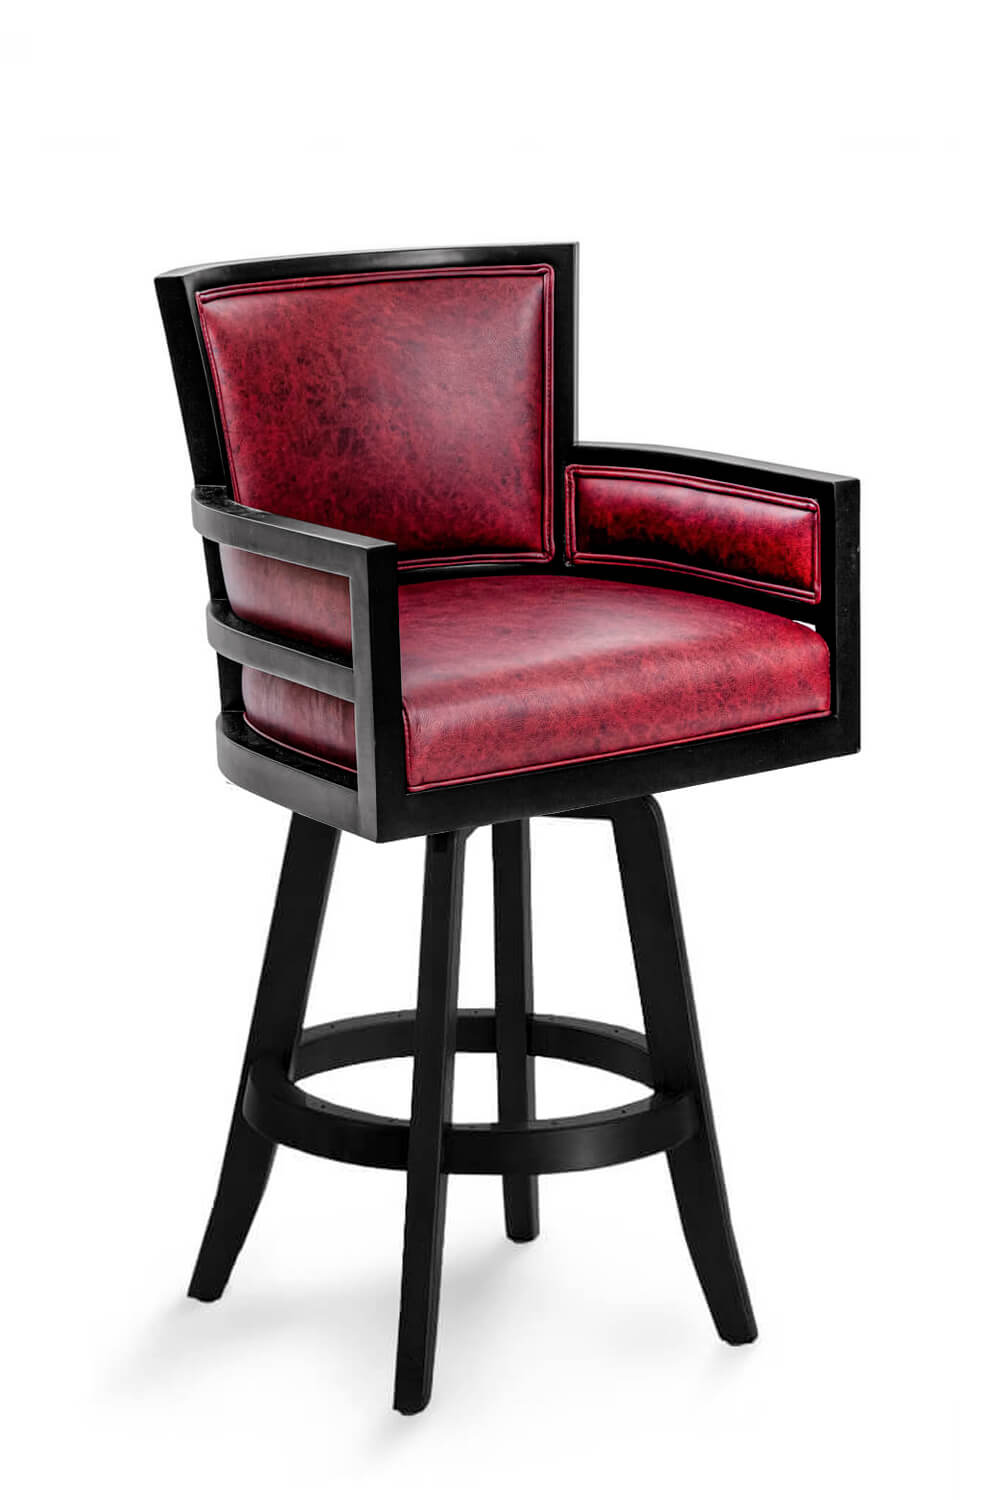 Metra Upholstered Wood Swivel Stool, Red Leather Stools